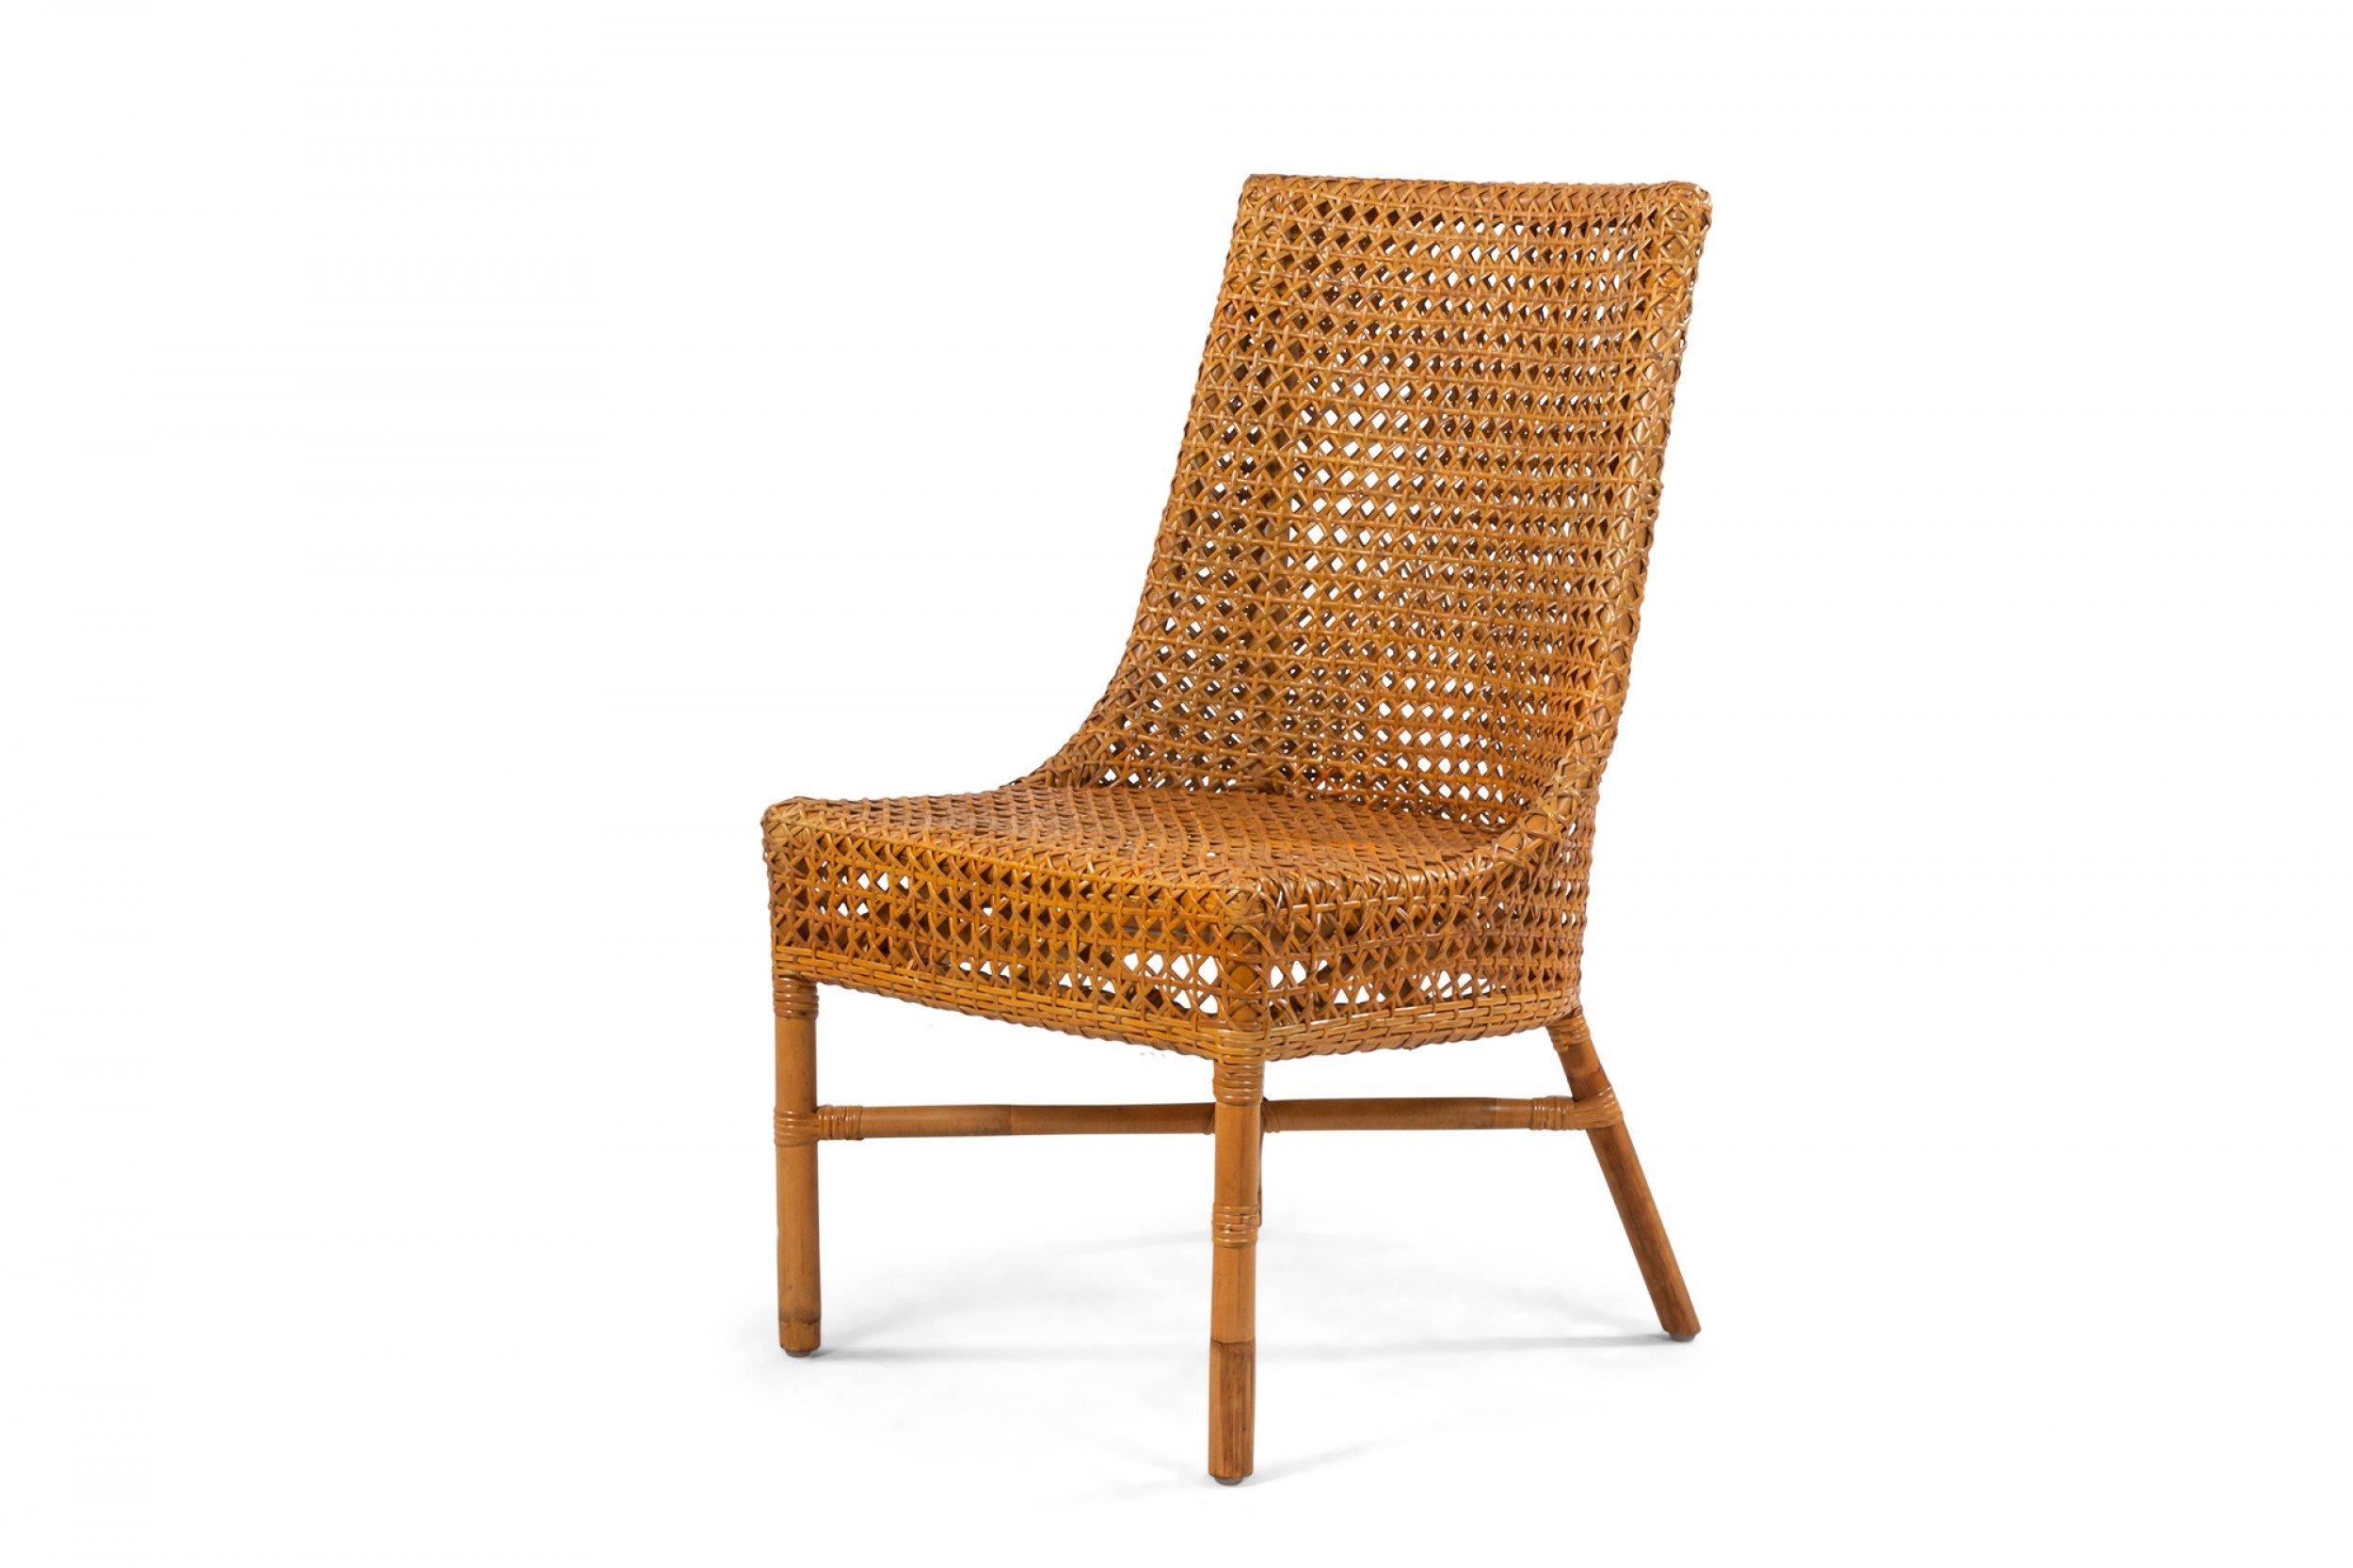 36 Contemporary curved back natural woven wicker side chairs supported on faux bamboo legs connected by a stretcher (PRICED EACH).